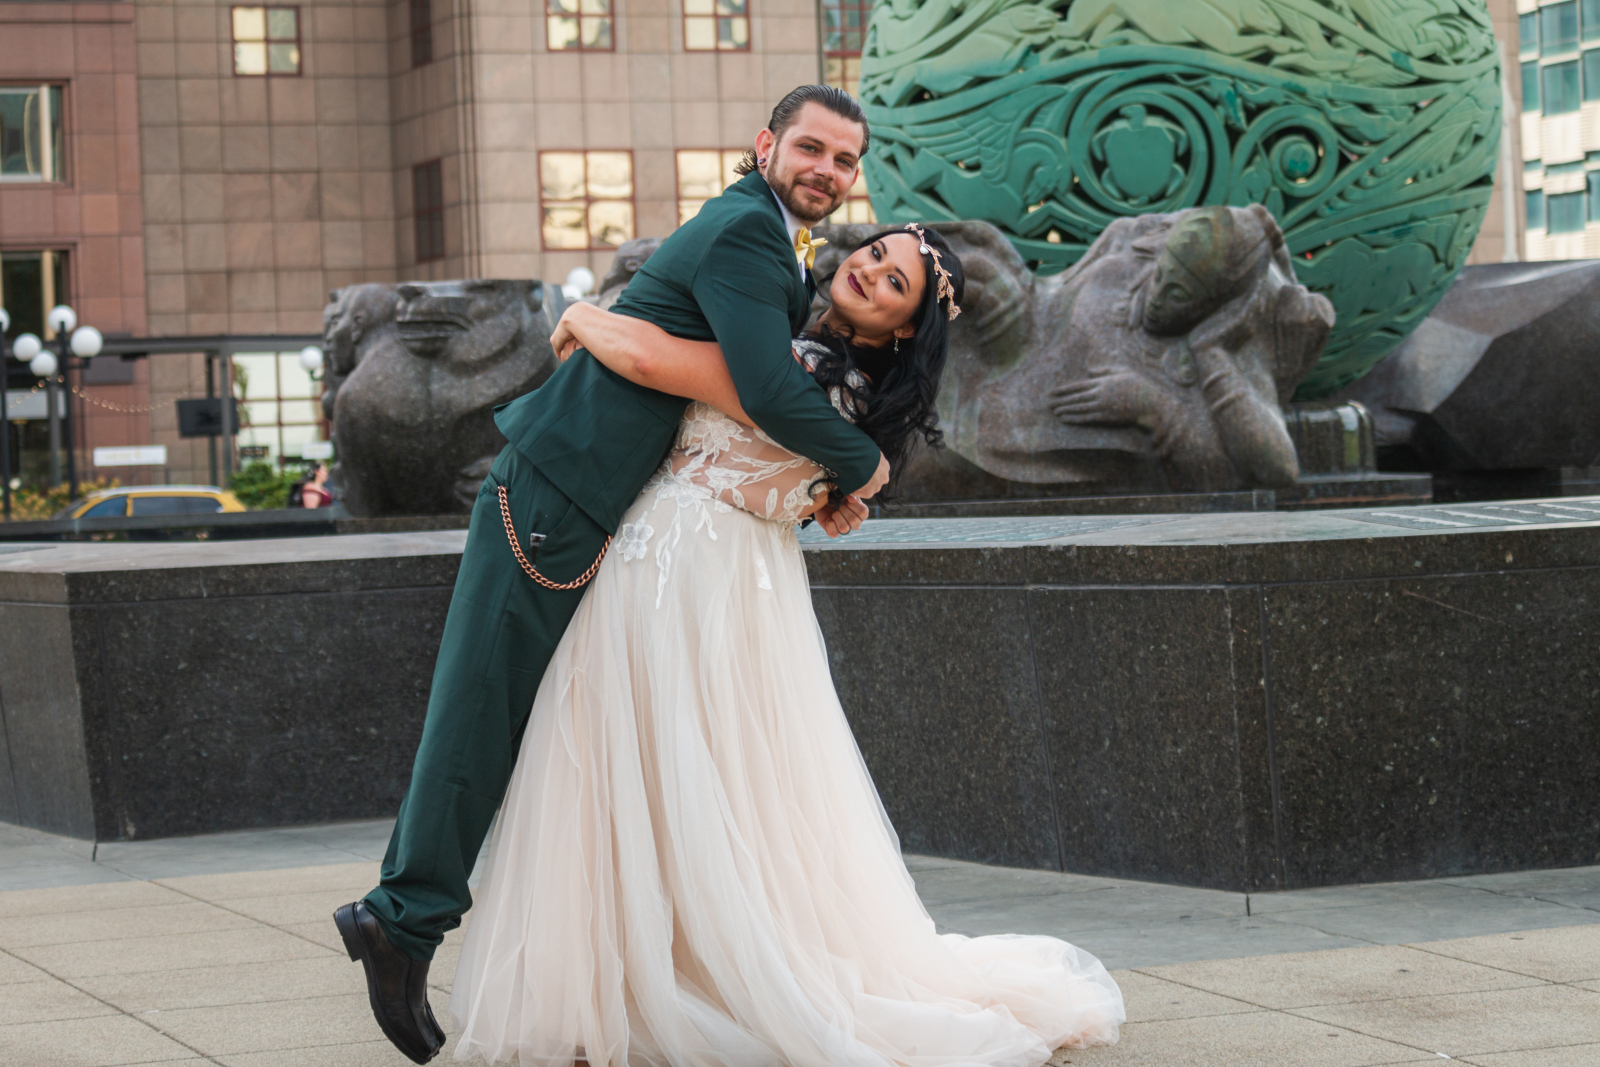 Two brides with groomsman, bridal party portrait, fun bridal party portrait, funny, mixed bridal party, two wedding dresses, love is love, beautiful lesbian wedding ceremony at House of Blues Cleveland, downtown Cleveland, Fountain of Eternal Life